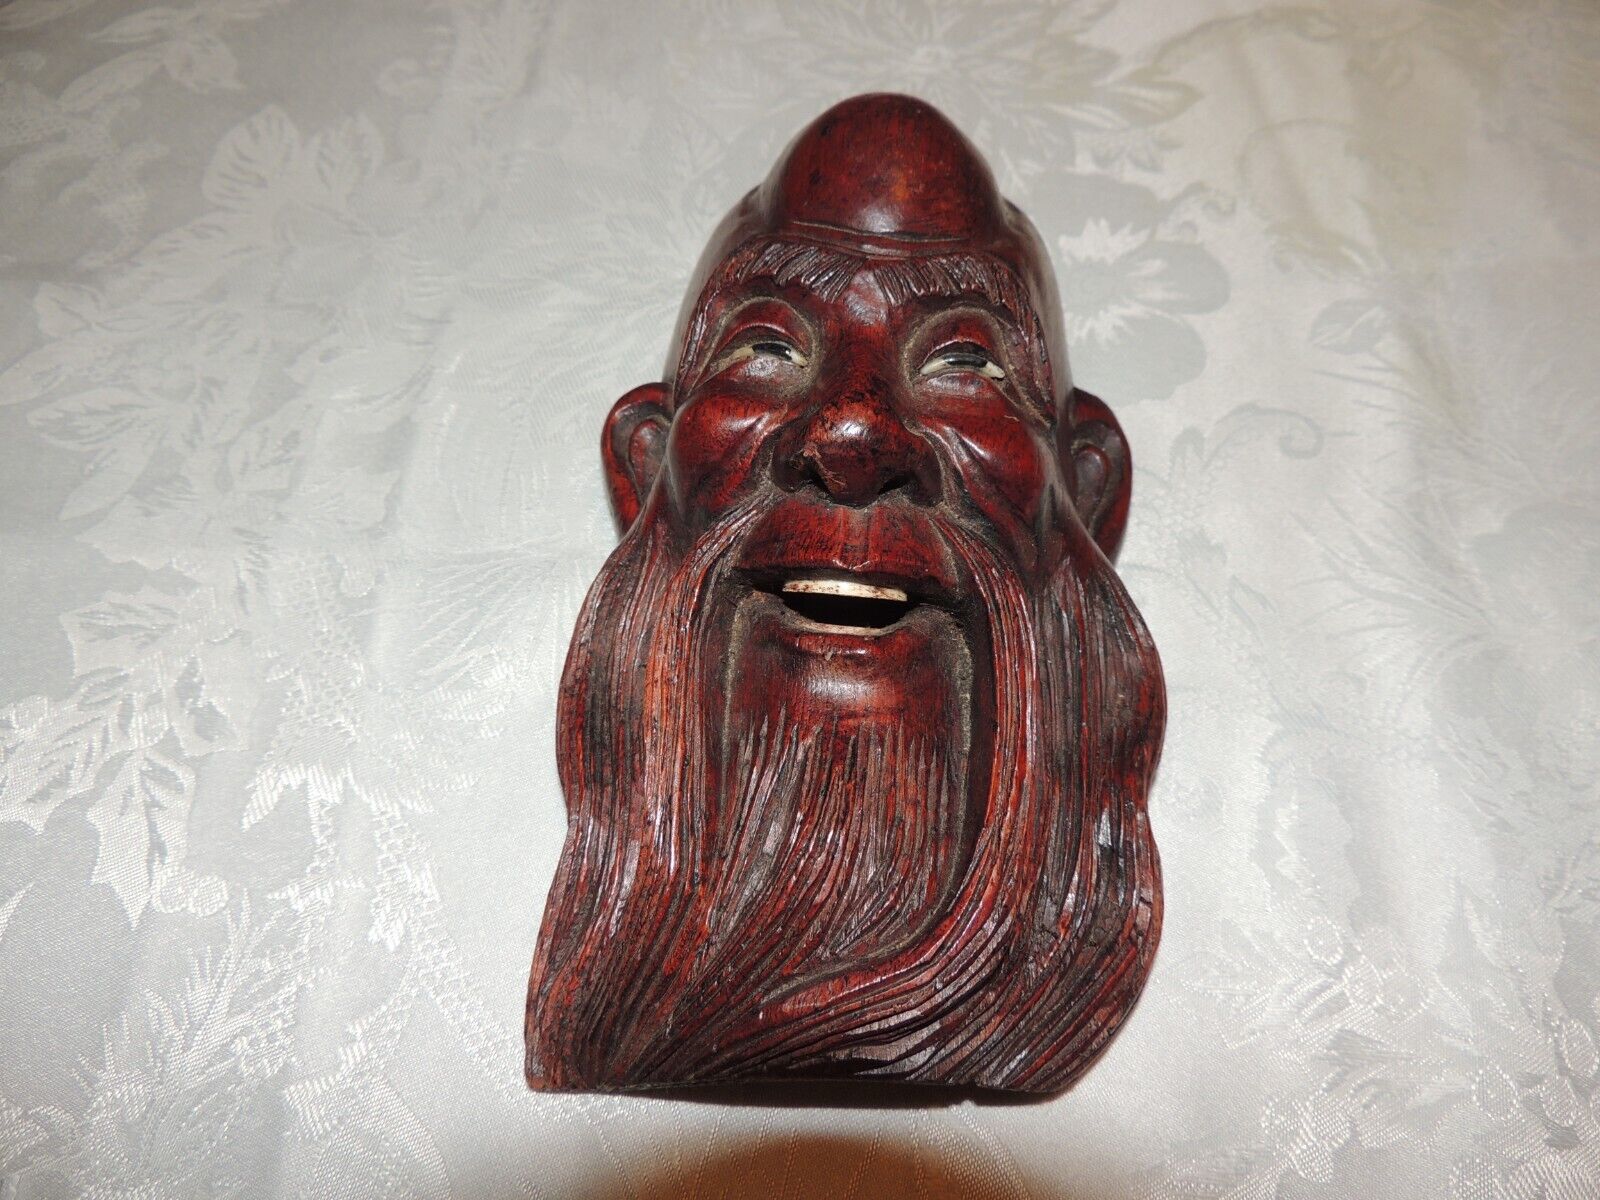  WOODEN HAND CARVED OLD MAN WITH BEARD WALL HANGING 8”  ( VERY DETAILED  )      